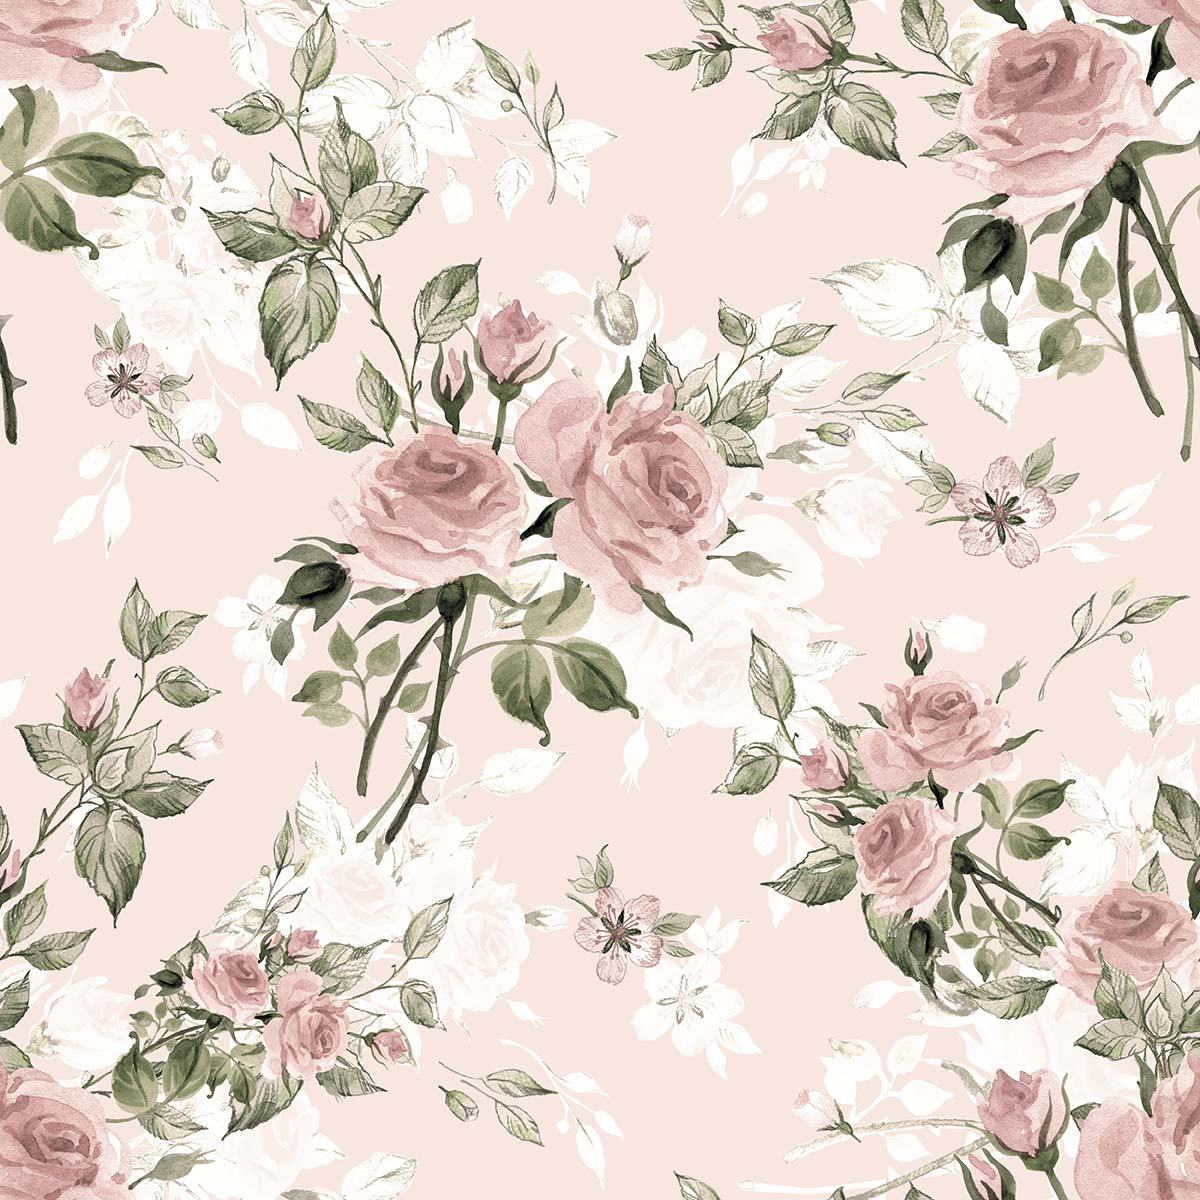 A pattern of pink roses and green leaves